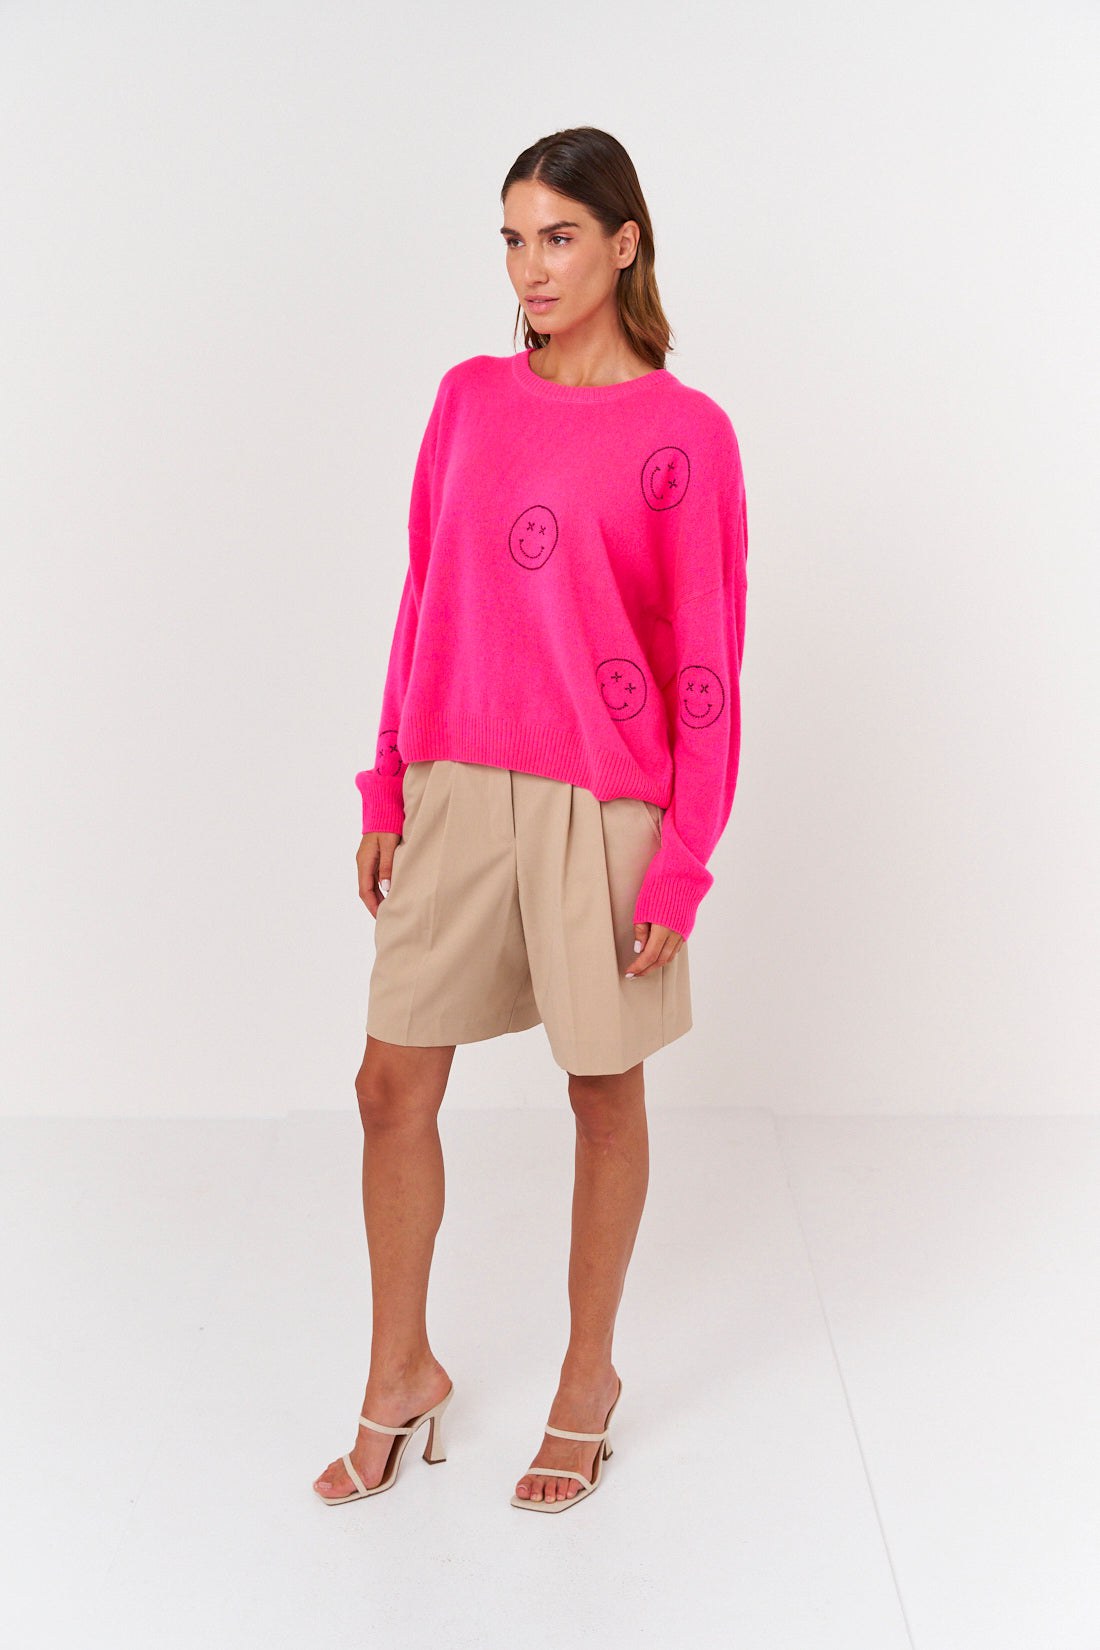 Smiley Stitch Crewneck Sweater Pink/Black, Sweater by Brodie Cashmere | LIT Boutique